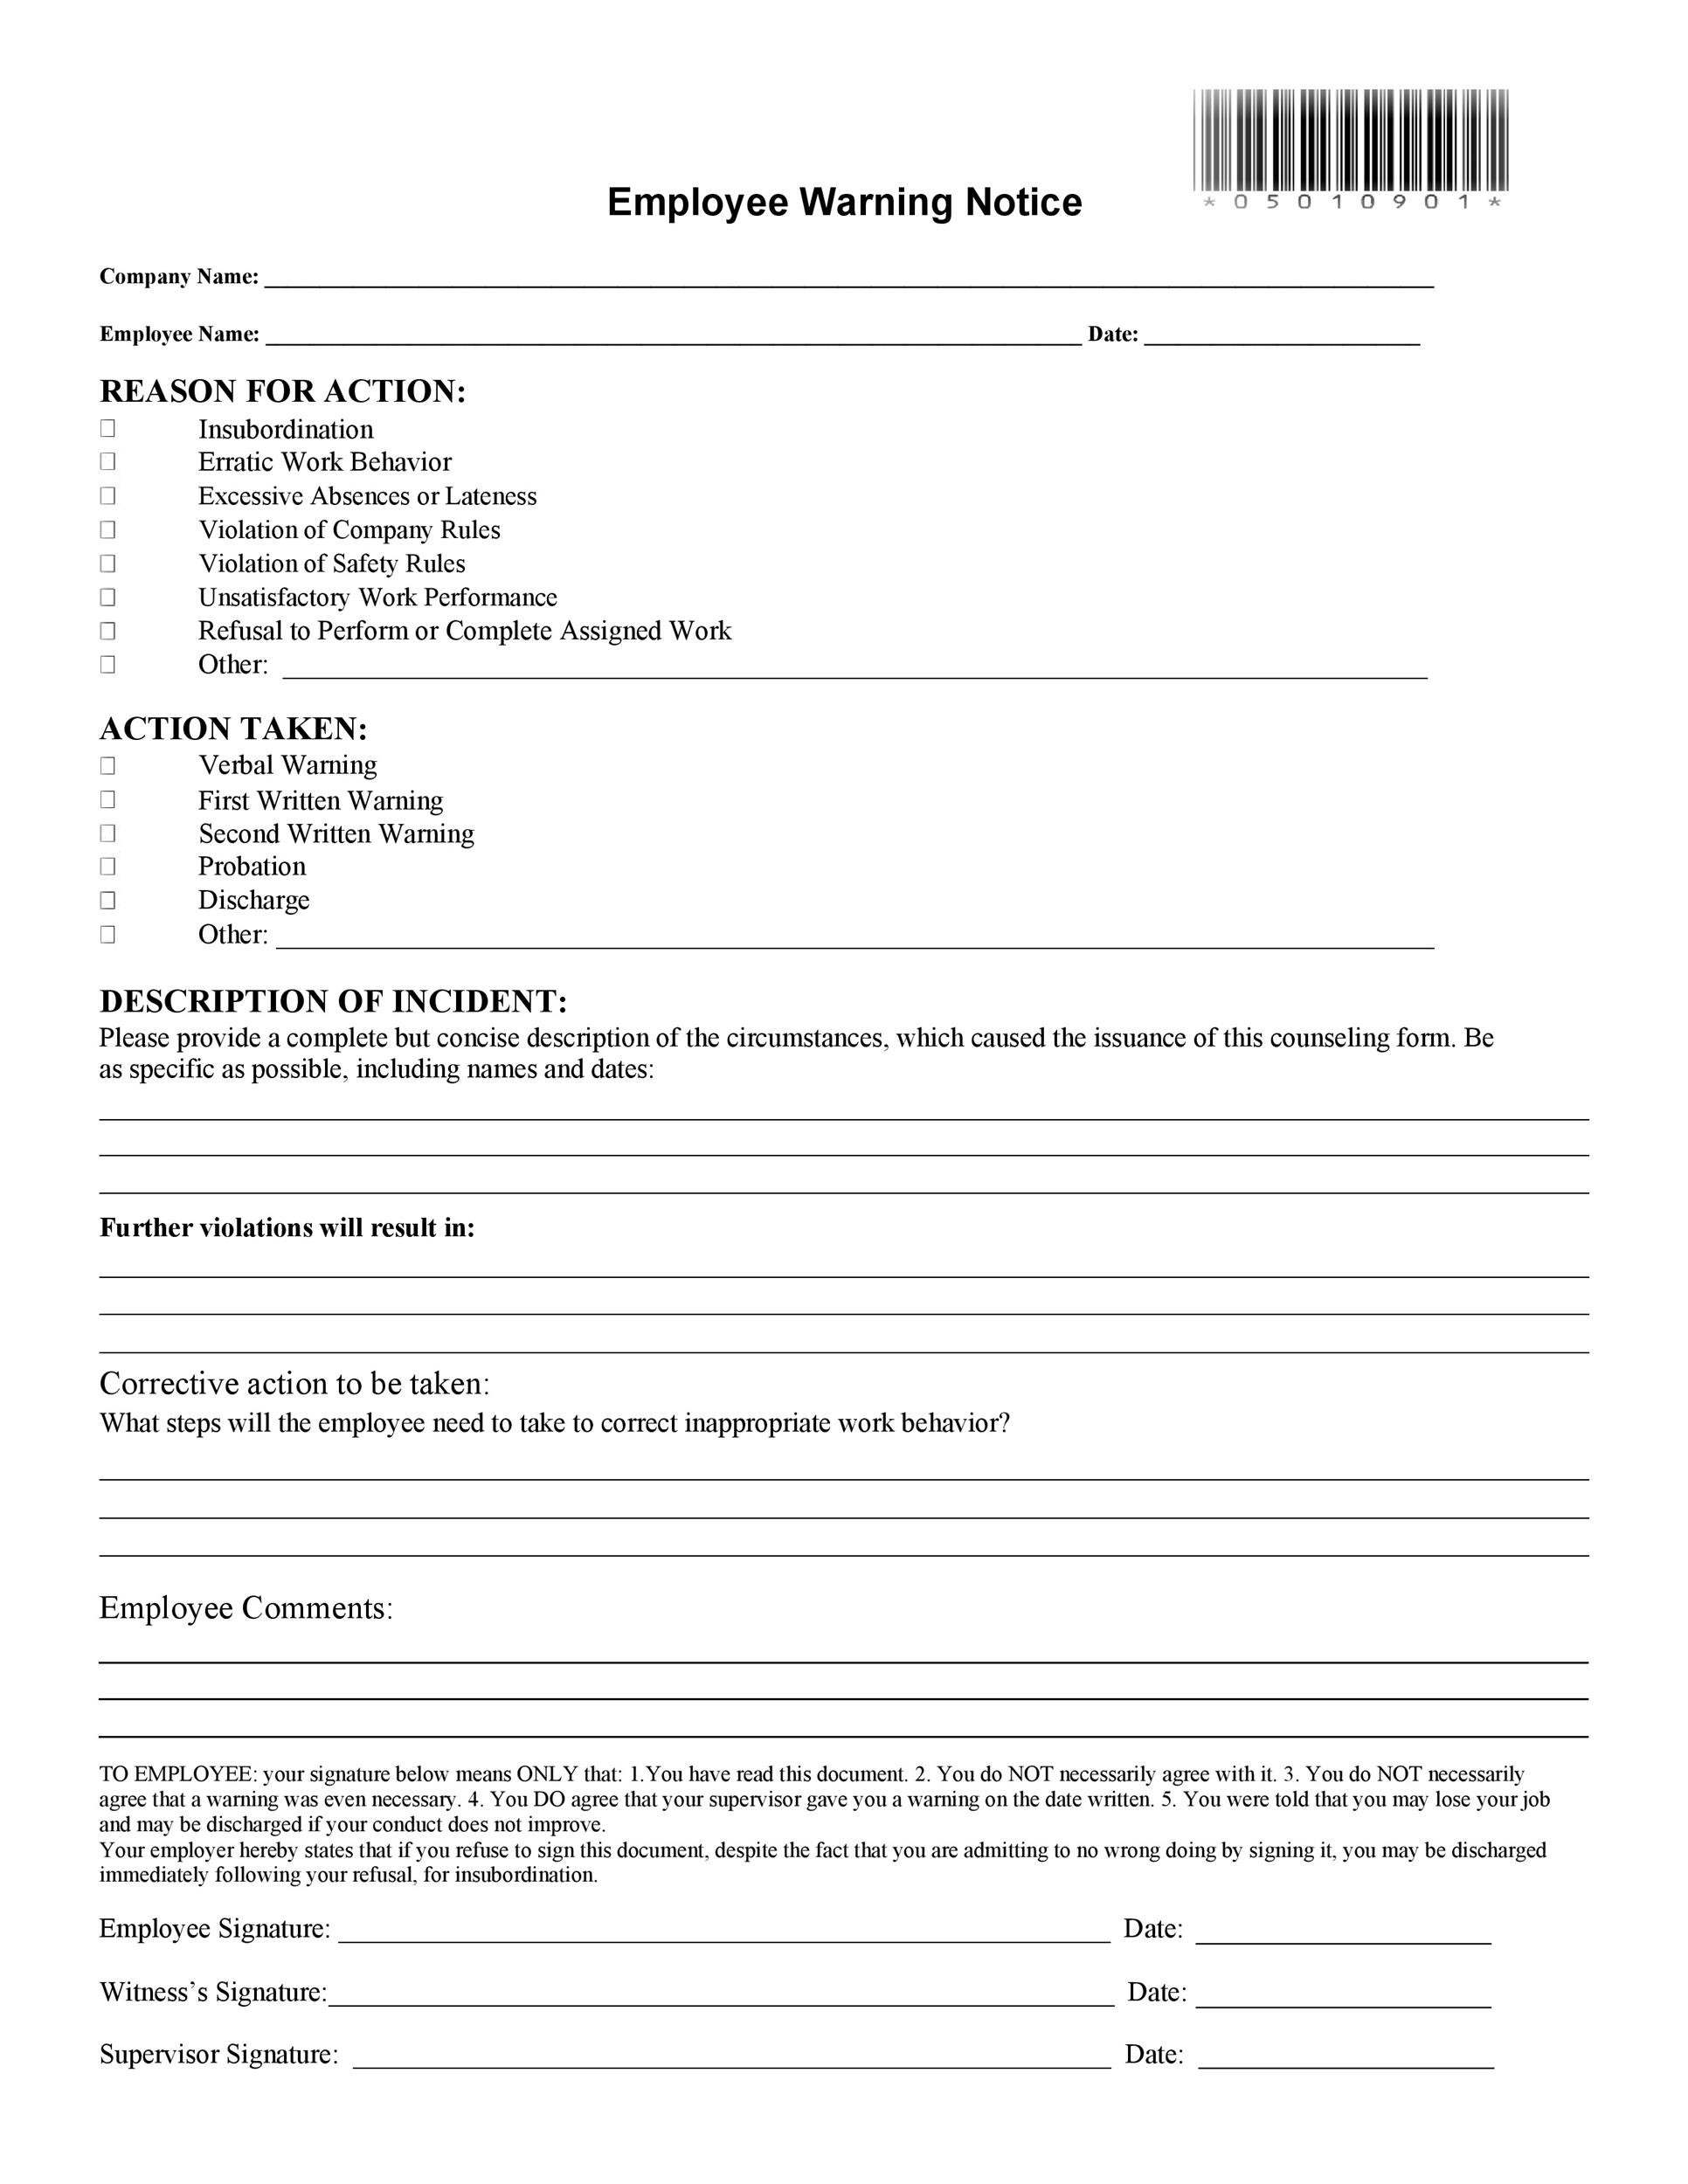 Employee Warning Notice Download 56 Free Templates & Forms